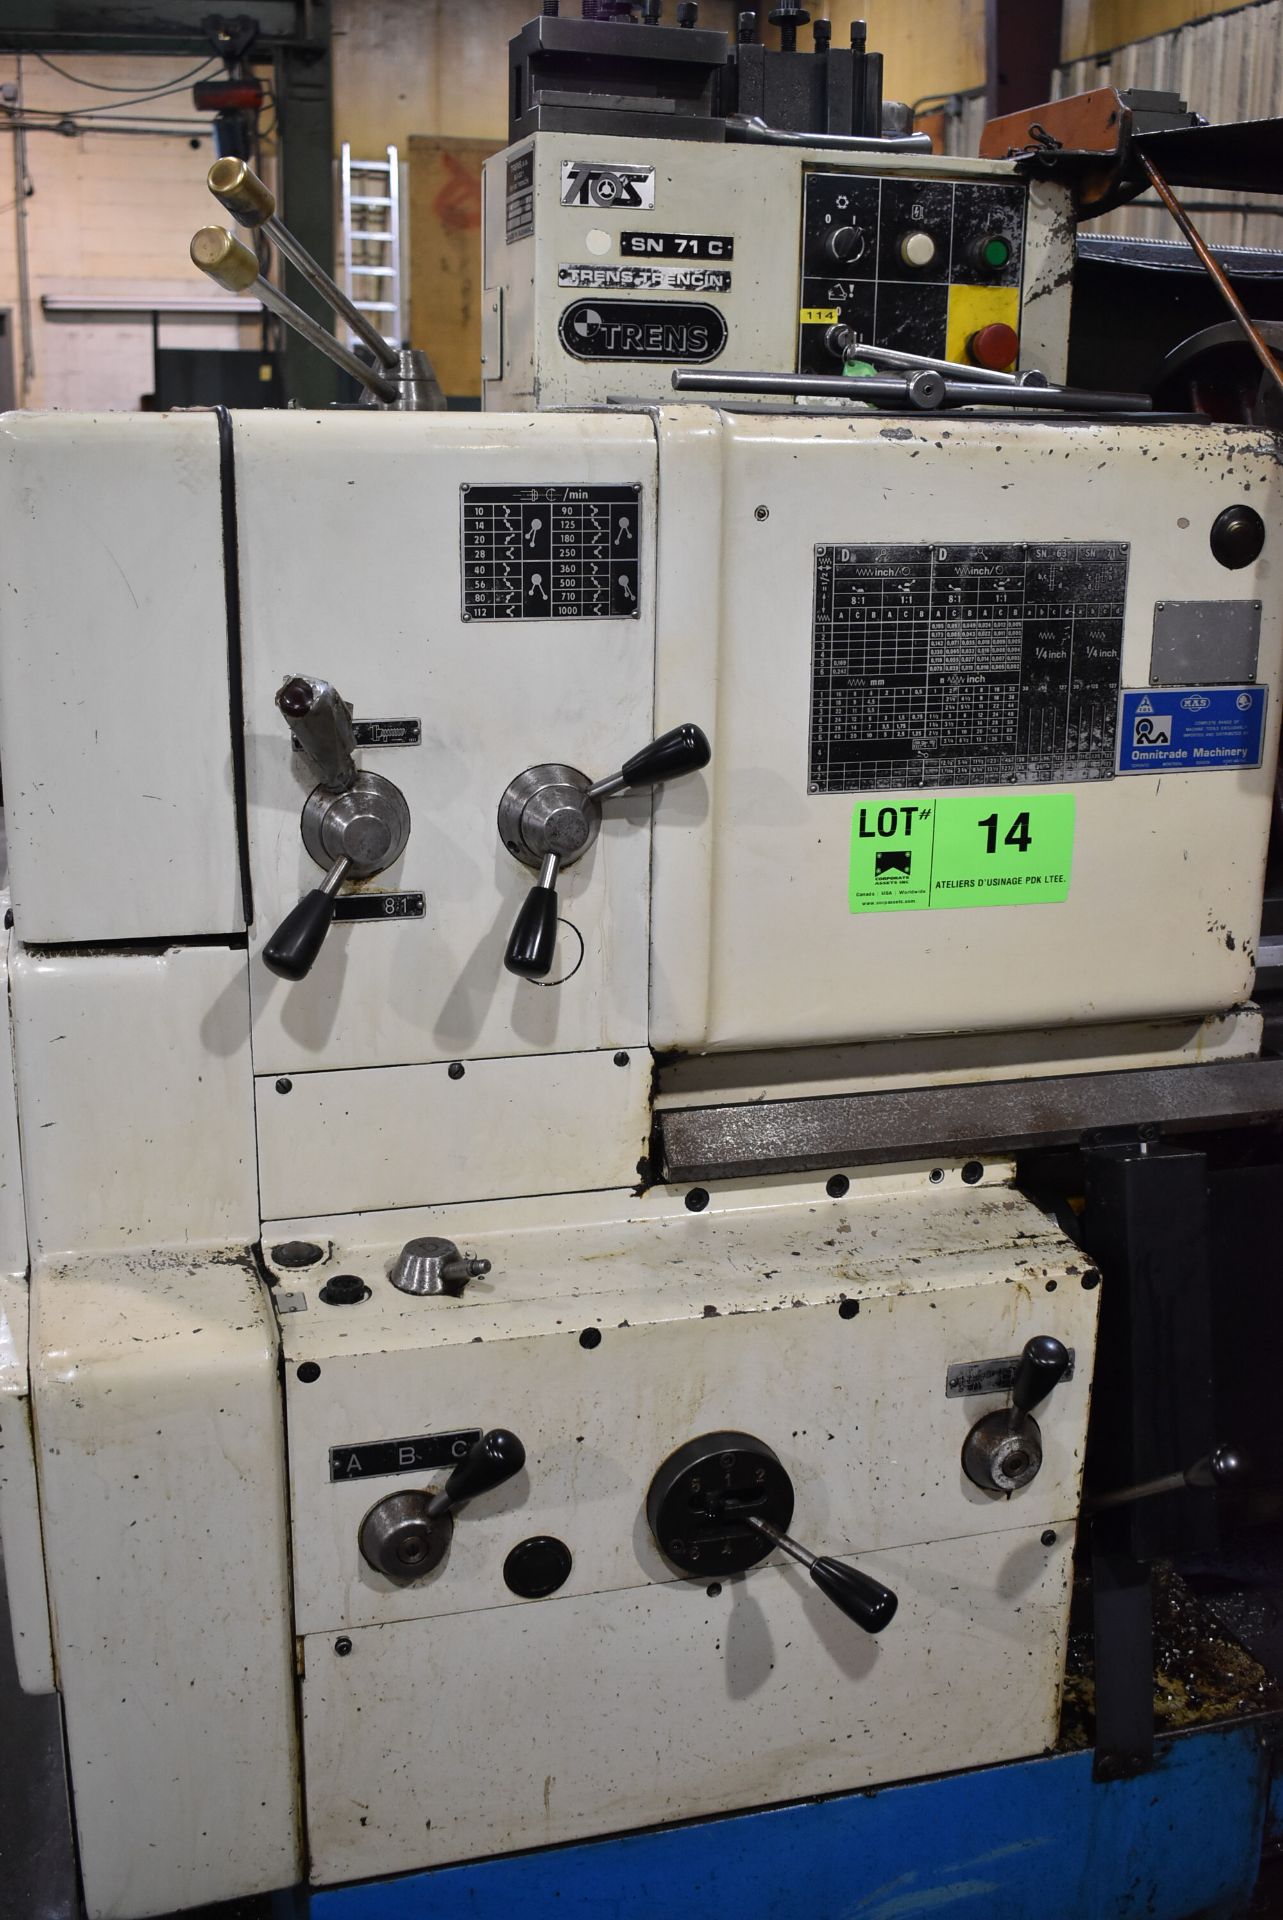 TOS SN 71 C GAP BED ENGINE LATHE WITH 30" SWING, 120" BETWEEN CENTERS, 3" SPINDLE BORE, SPEEDS TO - Image 8 of 18